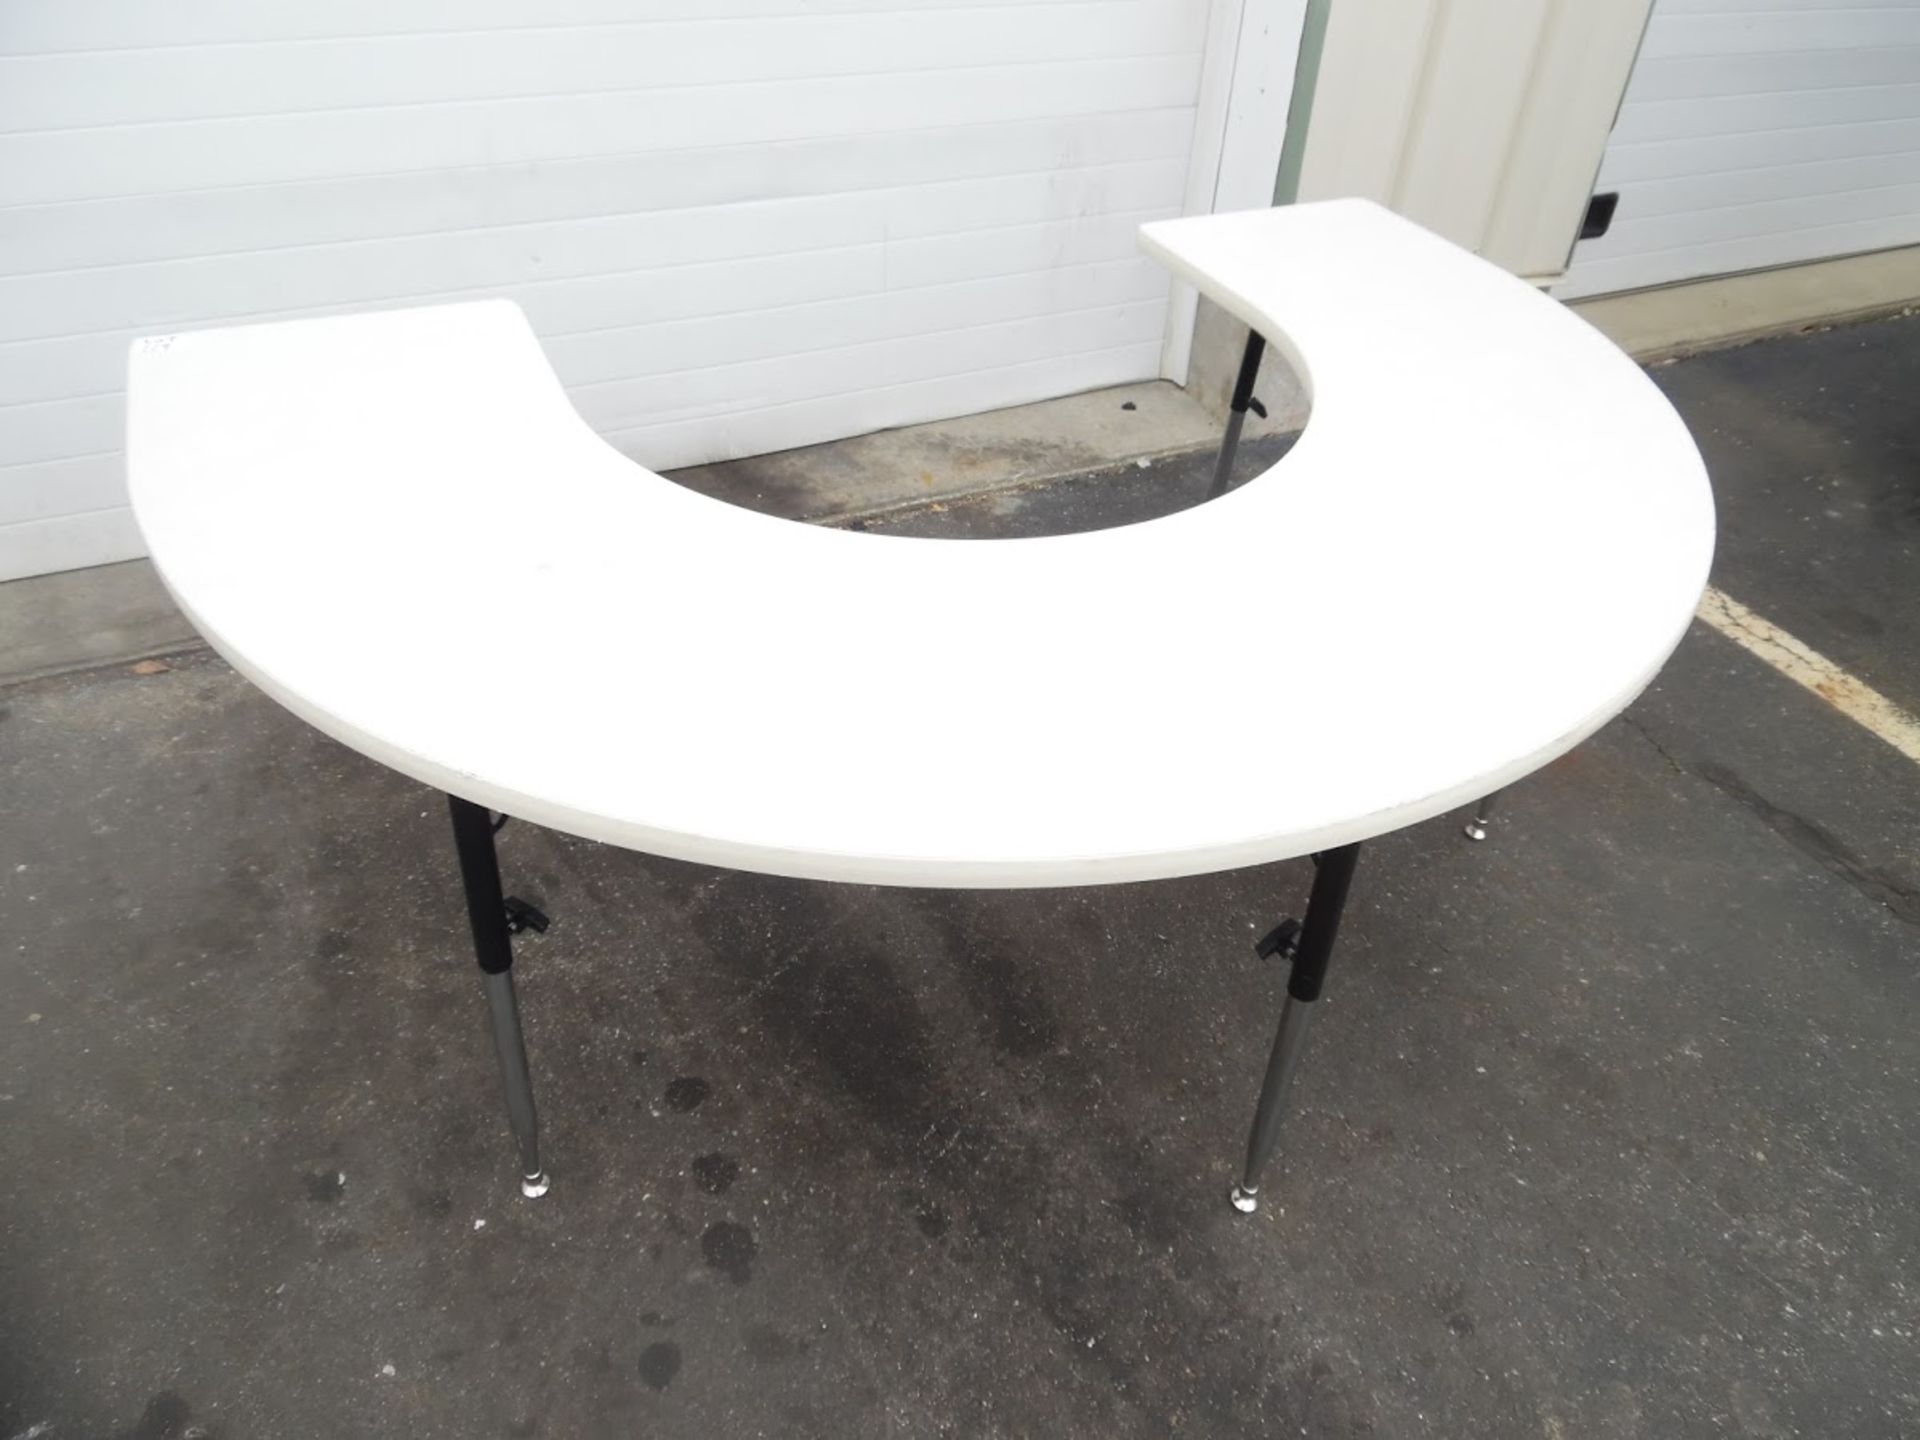 Arch Shaped Adjustable Height Table - Image 2 of 3